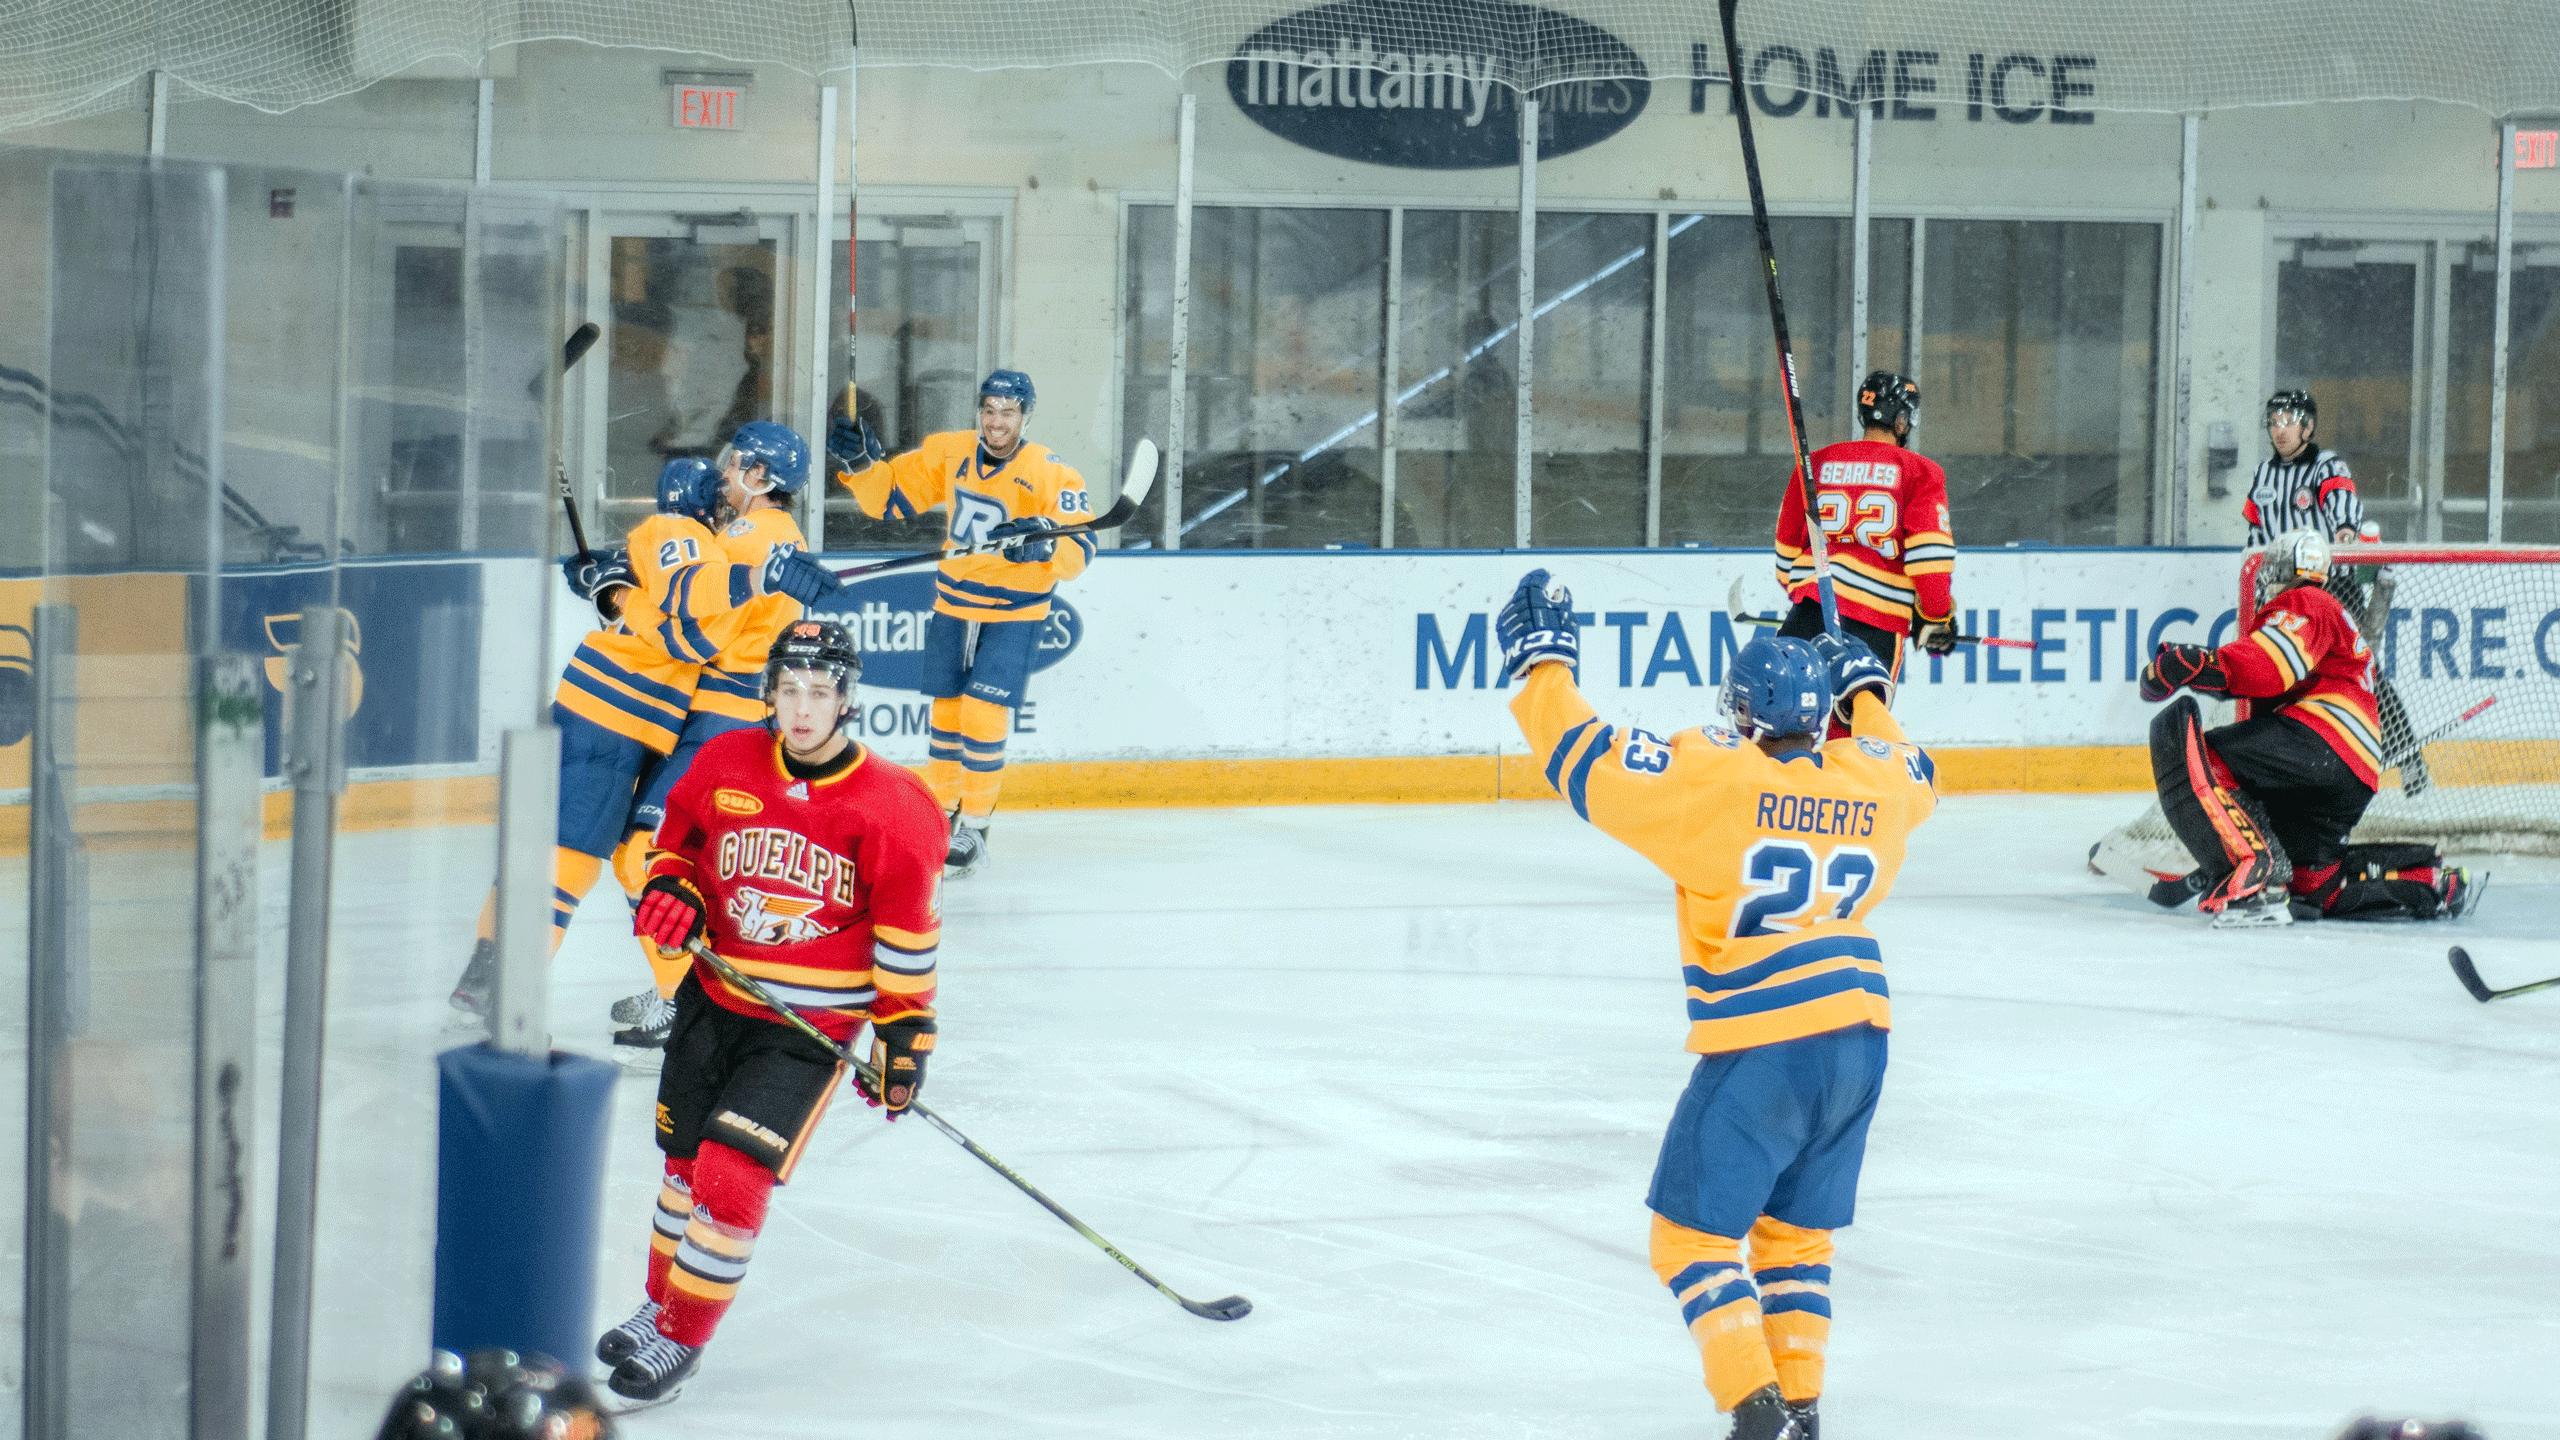 A group of hockey players in yellow jerseys celebrate a goal